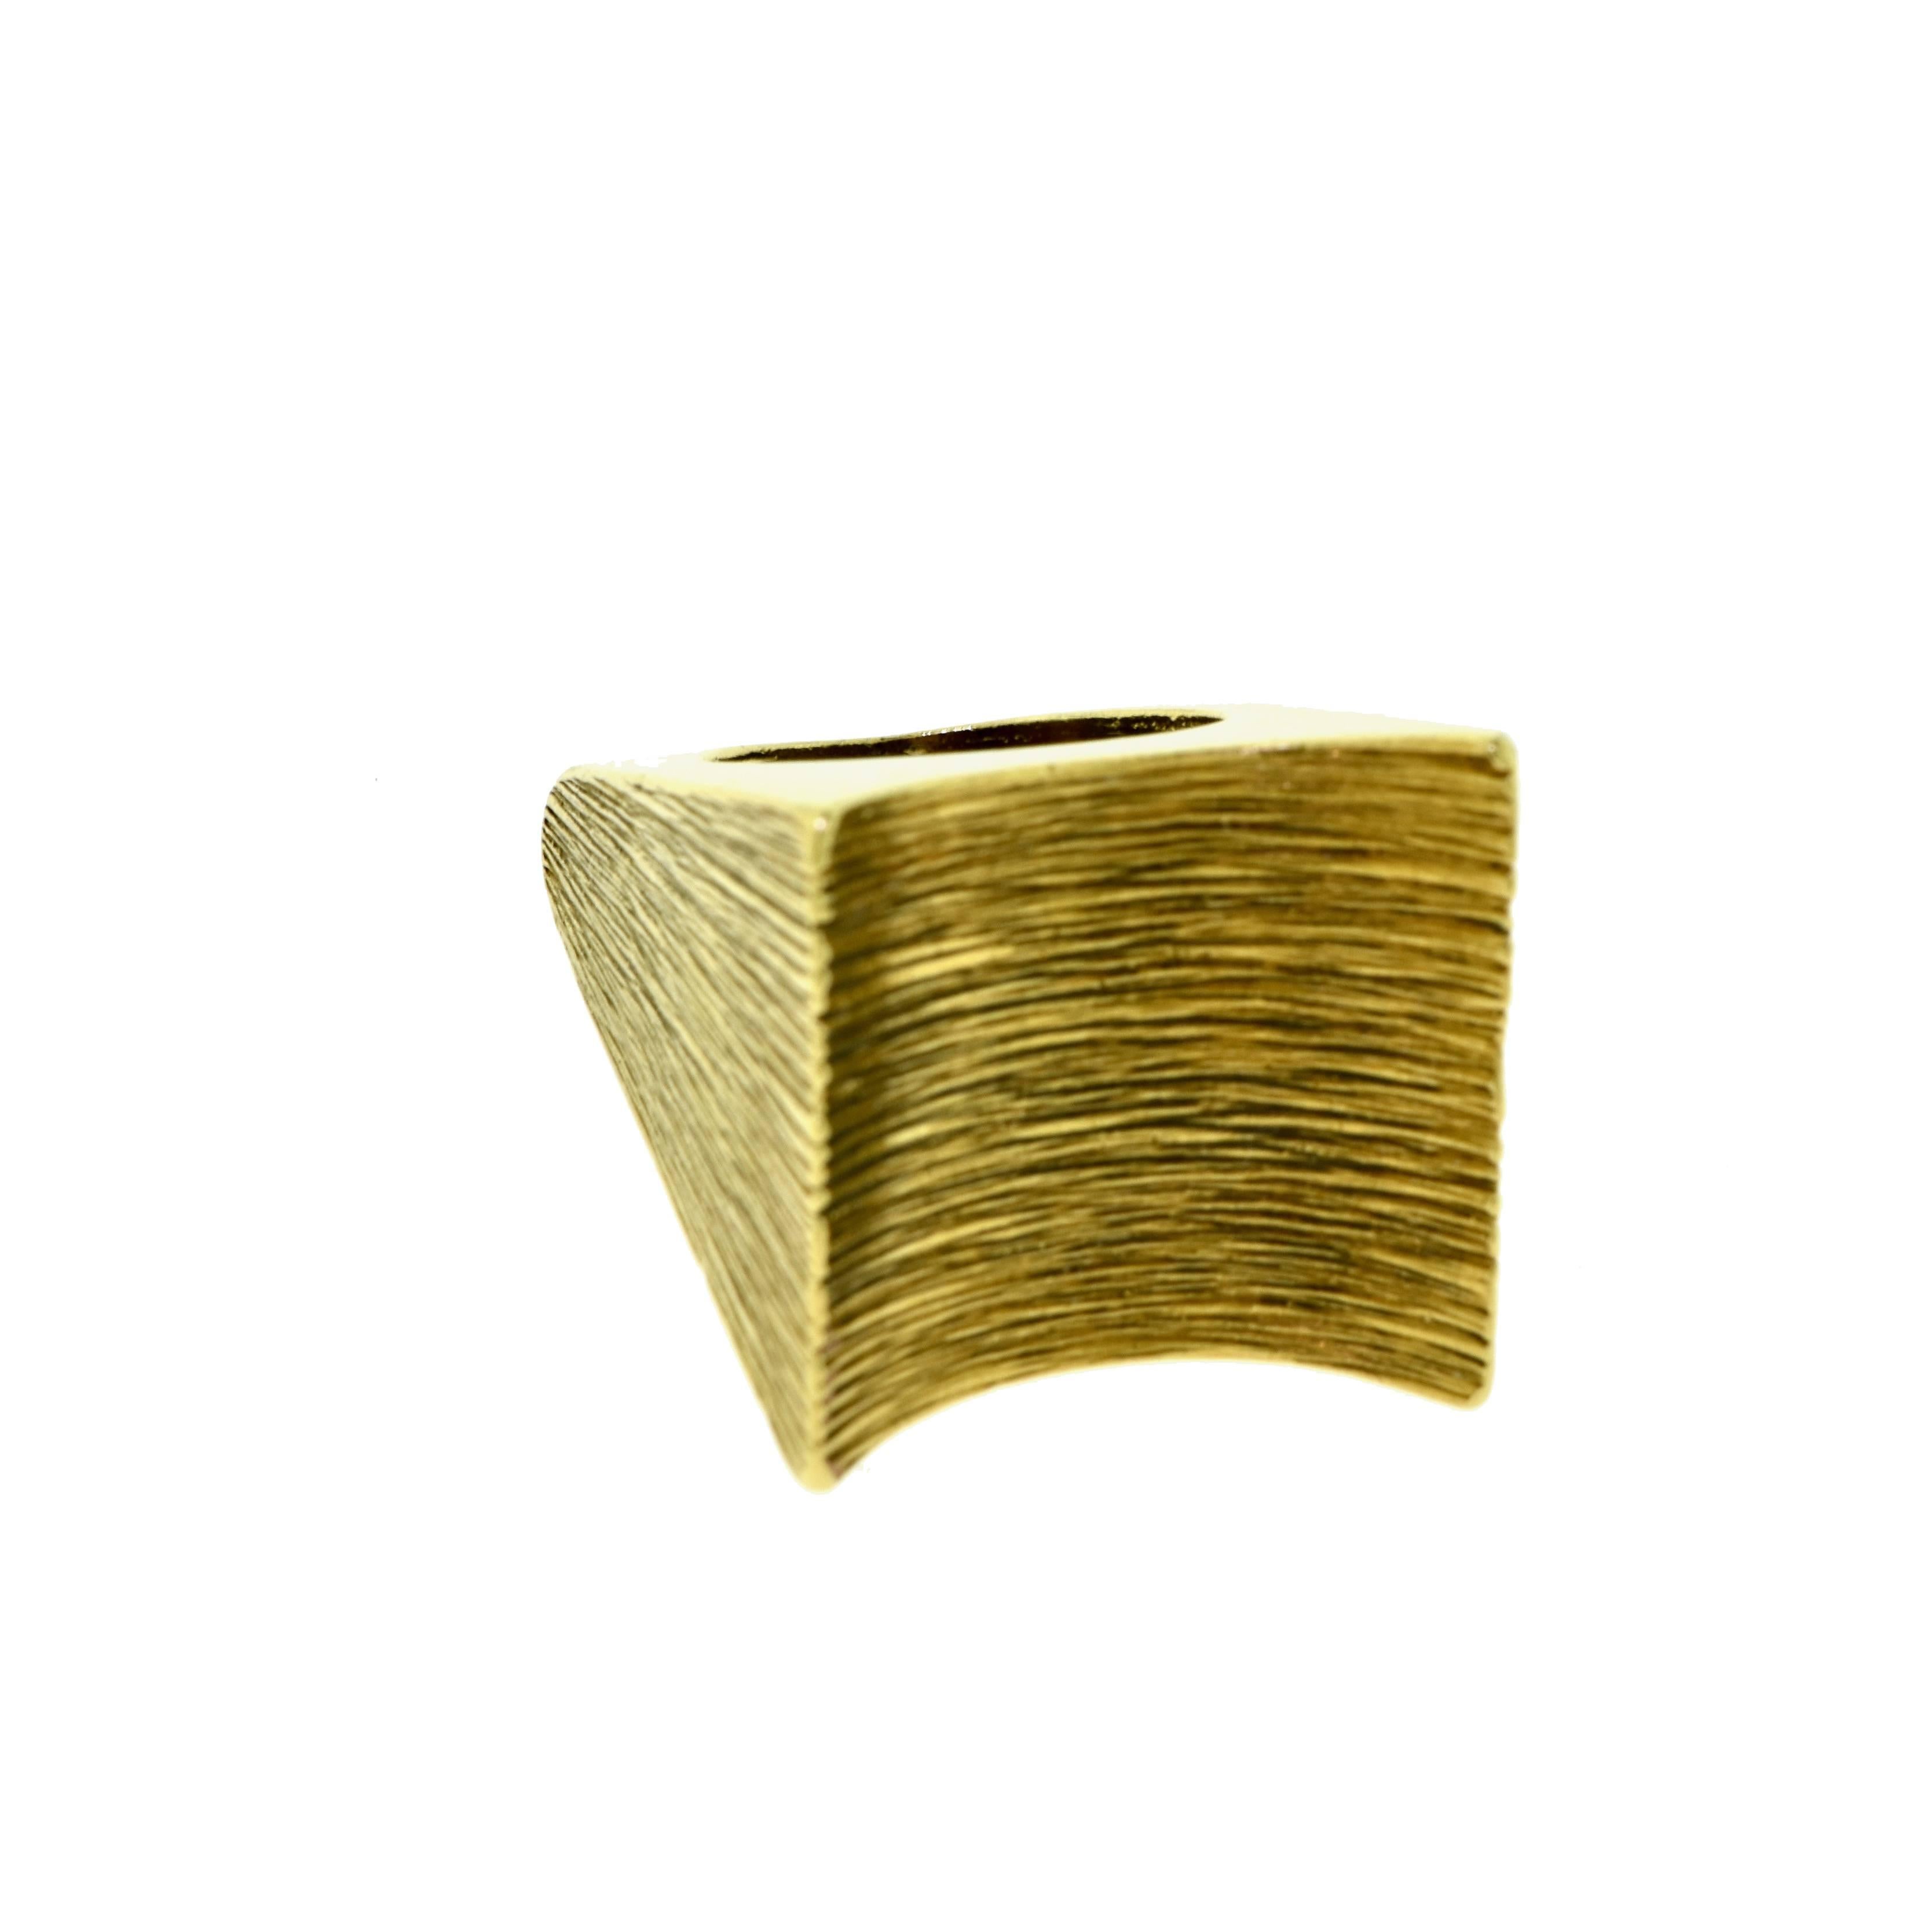 Metal: Yellow Gold
Metal Purity: 18k
Total Item Weight (g): 16.6
Ring Dimensions: 22 x 21 mm
Ring Height: 8 mm
Ring Size: 5